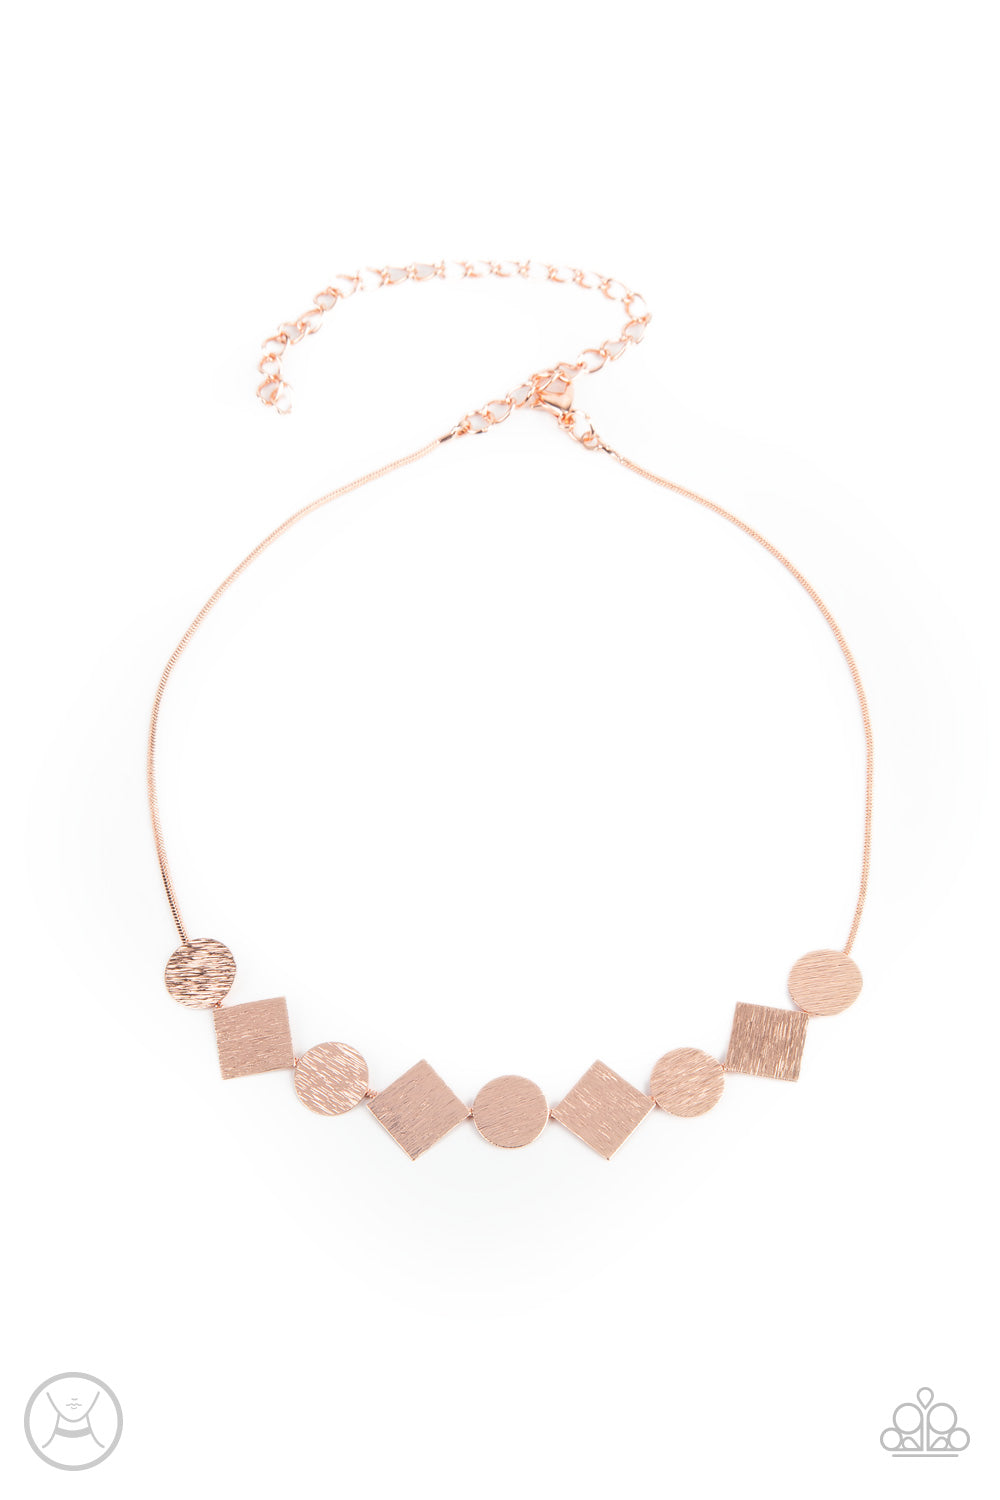 Don't Get Bent Out Of Shape Copper Choker Necklace - Paparazzi Accessories  Featuring shimmery scratched surfaces, a dainty collection of flat round and square shiny copper frames adorn the front of a shiny copper snake chain around the neck for a minimalist inspired look. Features an adjustable clasp closure.  All Paparazzi Accessories are lead free and nickel free!  Sold as one individual choker necklace. Includes one pair of matching earrings.